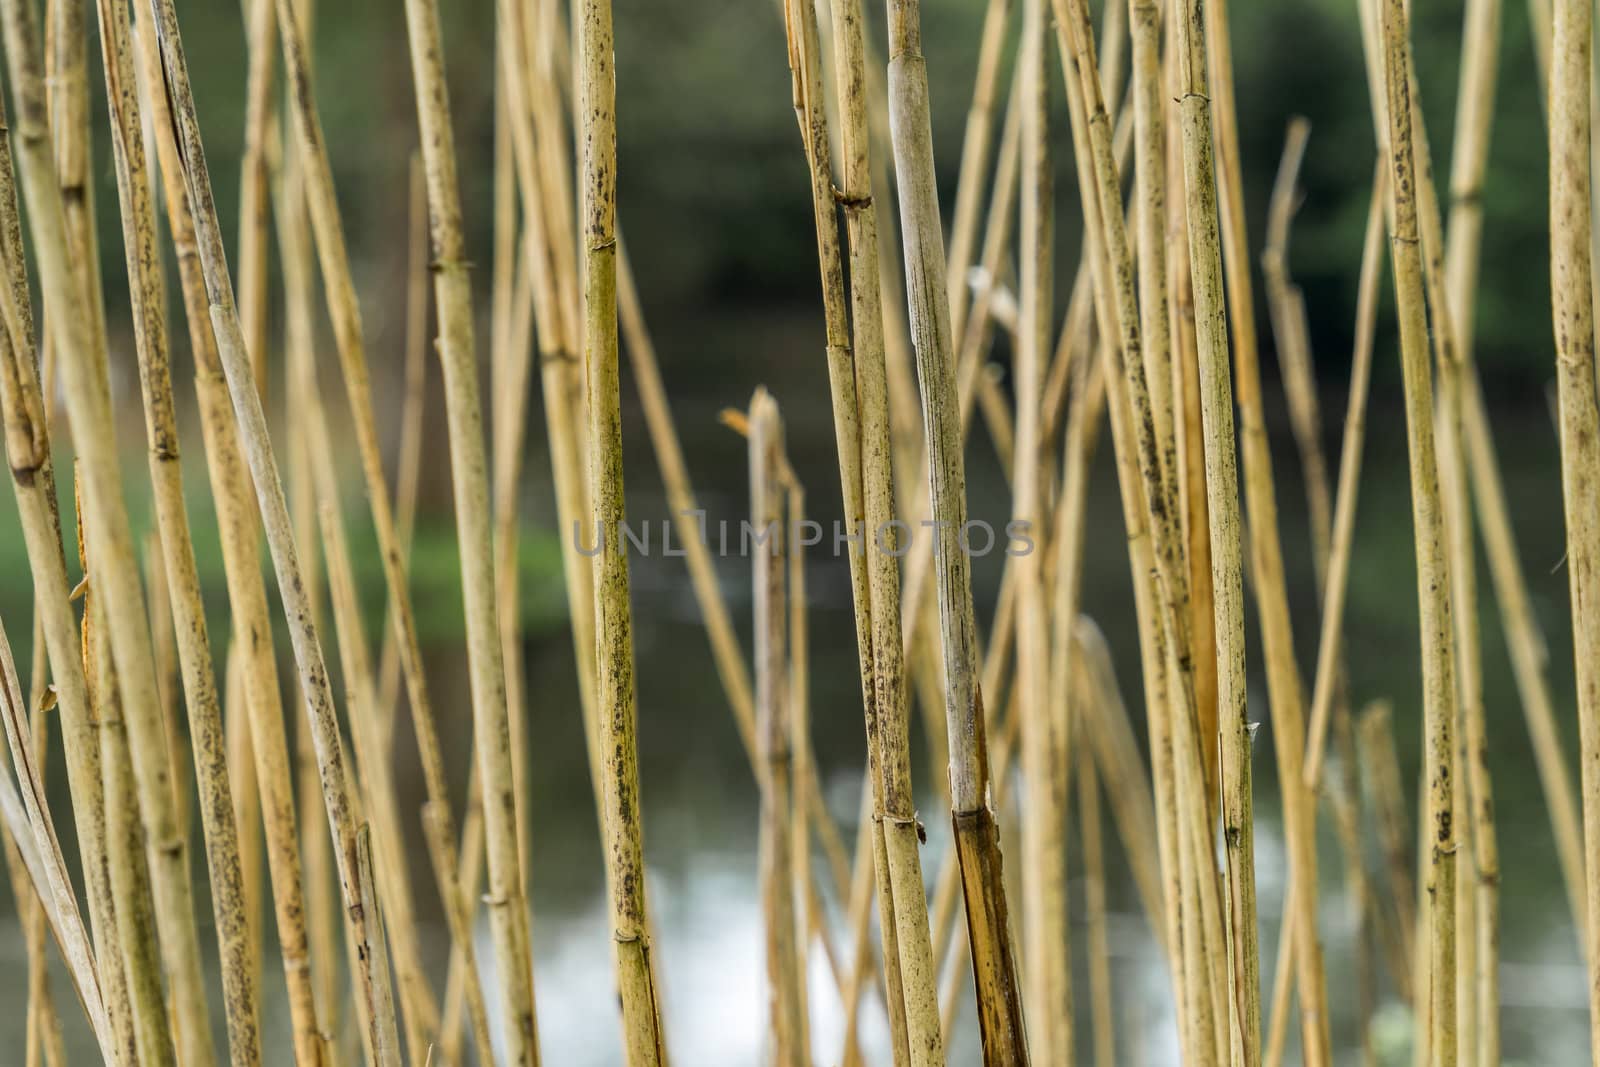 Abstract image with low depth of field of reed stalks at the edge of a stream by geogif